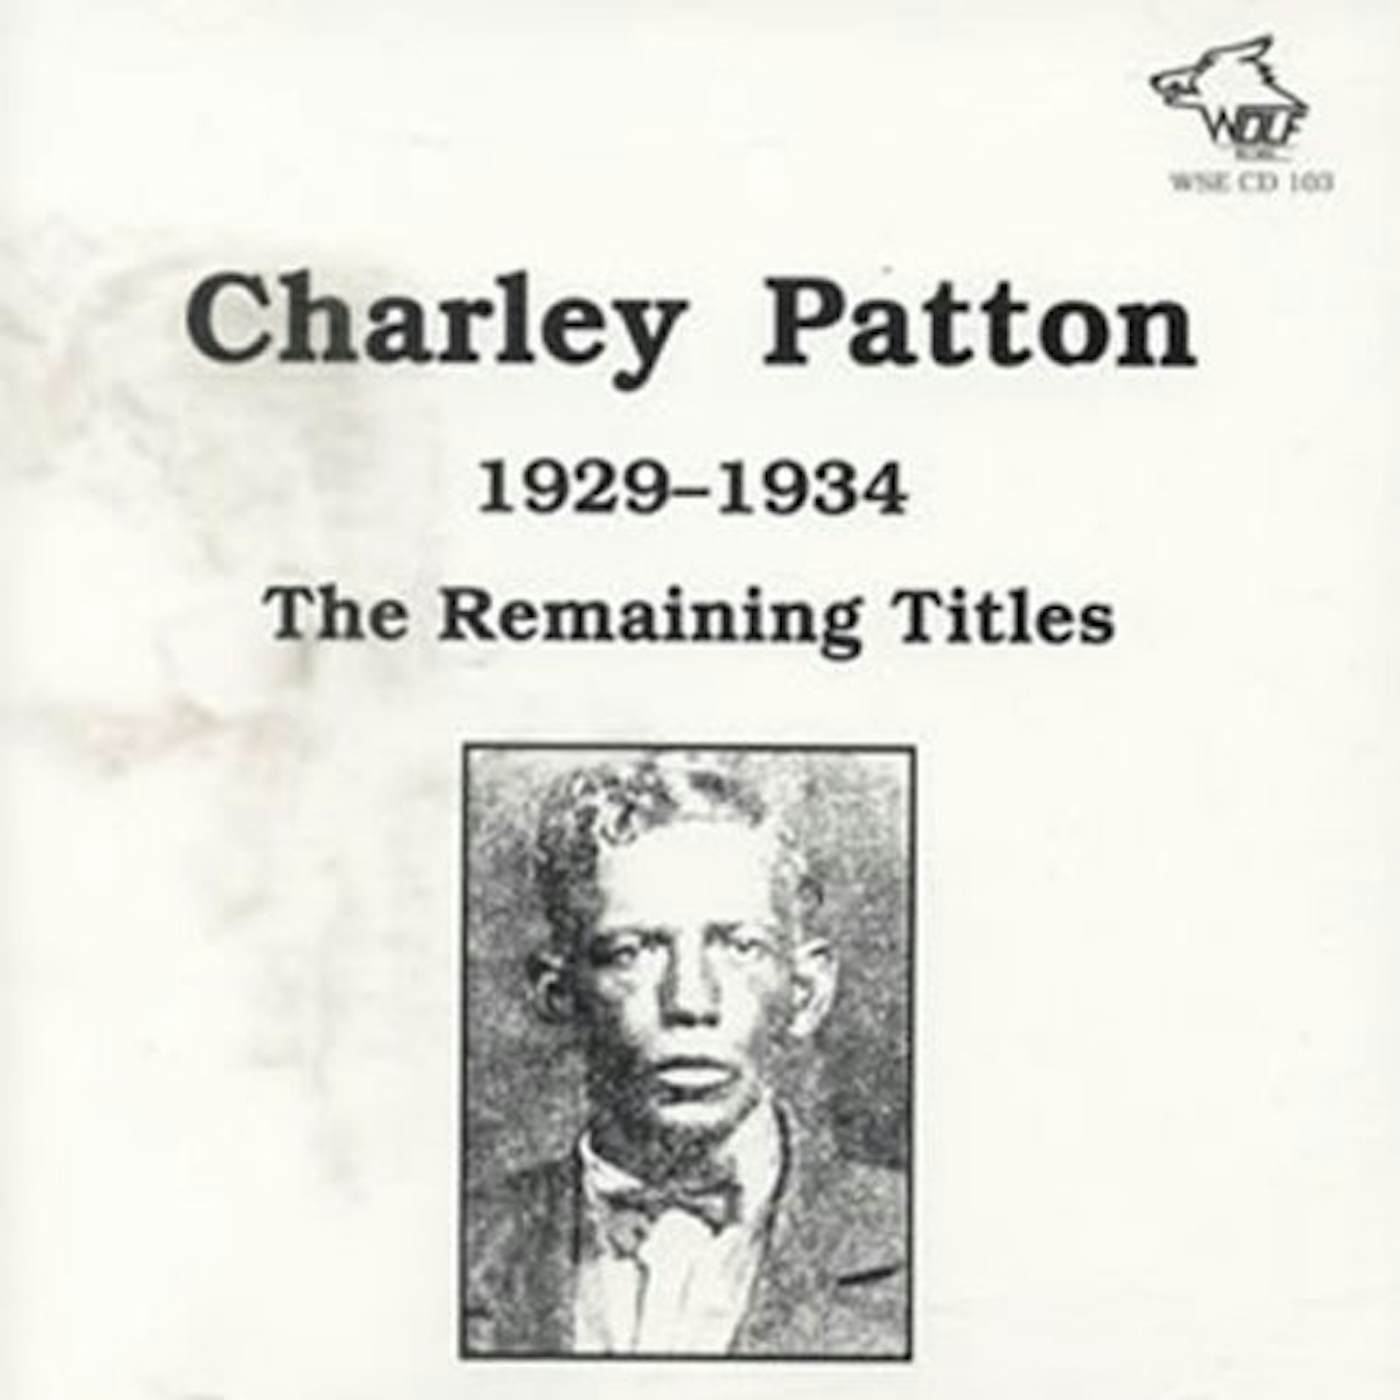 Charley Patton 1929-1934 REMAINING TITLES CD